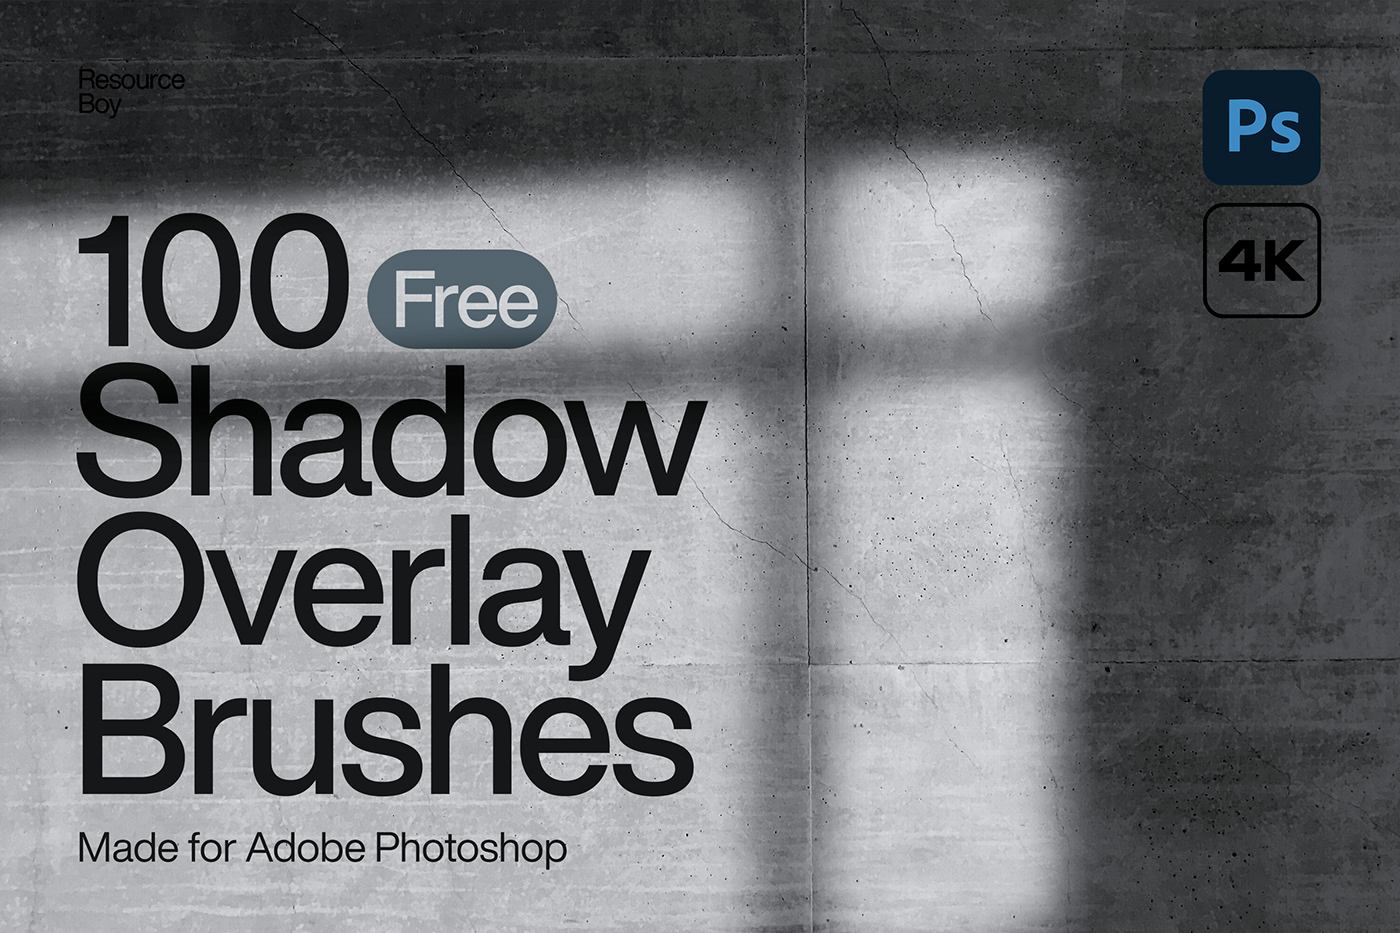 SHADOW OVERLAY Mockup free free brushes texture free textures freebie download Photoshop brushes shadow overlays